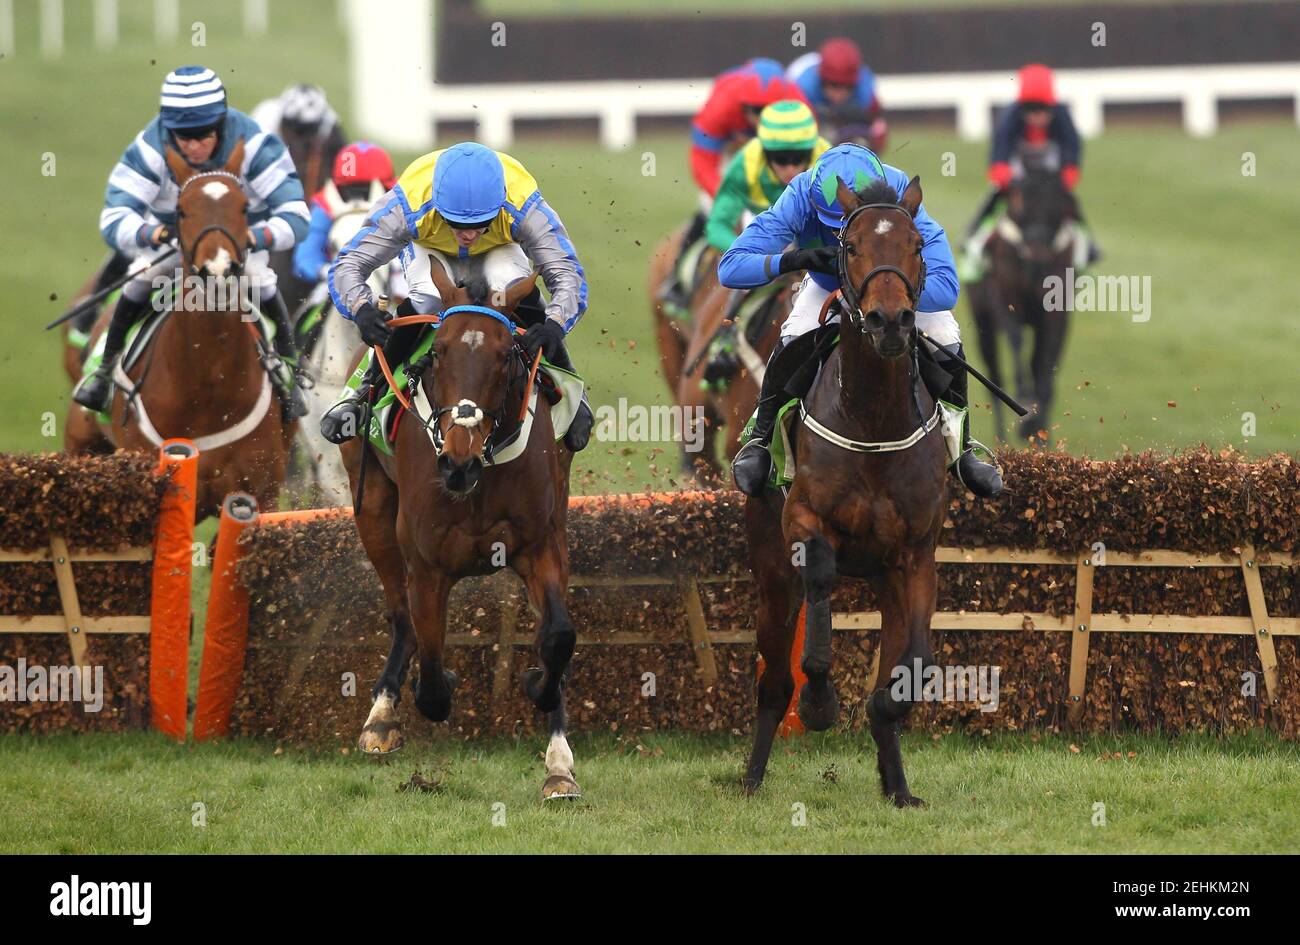 Horse Racing - Cheltenham Festival  - Cheltenham Racecourse - 15/3/11  Ruby Walsh and Hurricane Fly (R) get the better of the Jason Maguire ridden Peddlers Cross to go on and win the 15.20 Stan James Champion Hurdle Race  Mandatory Credit: Action Images / Julian Herbert  Livepic Stock Photo